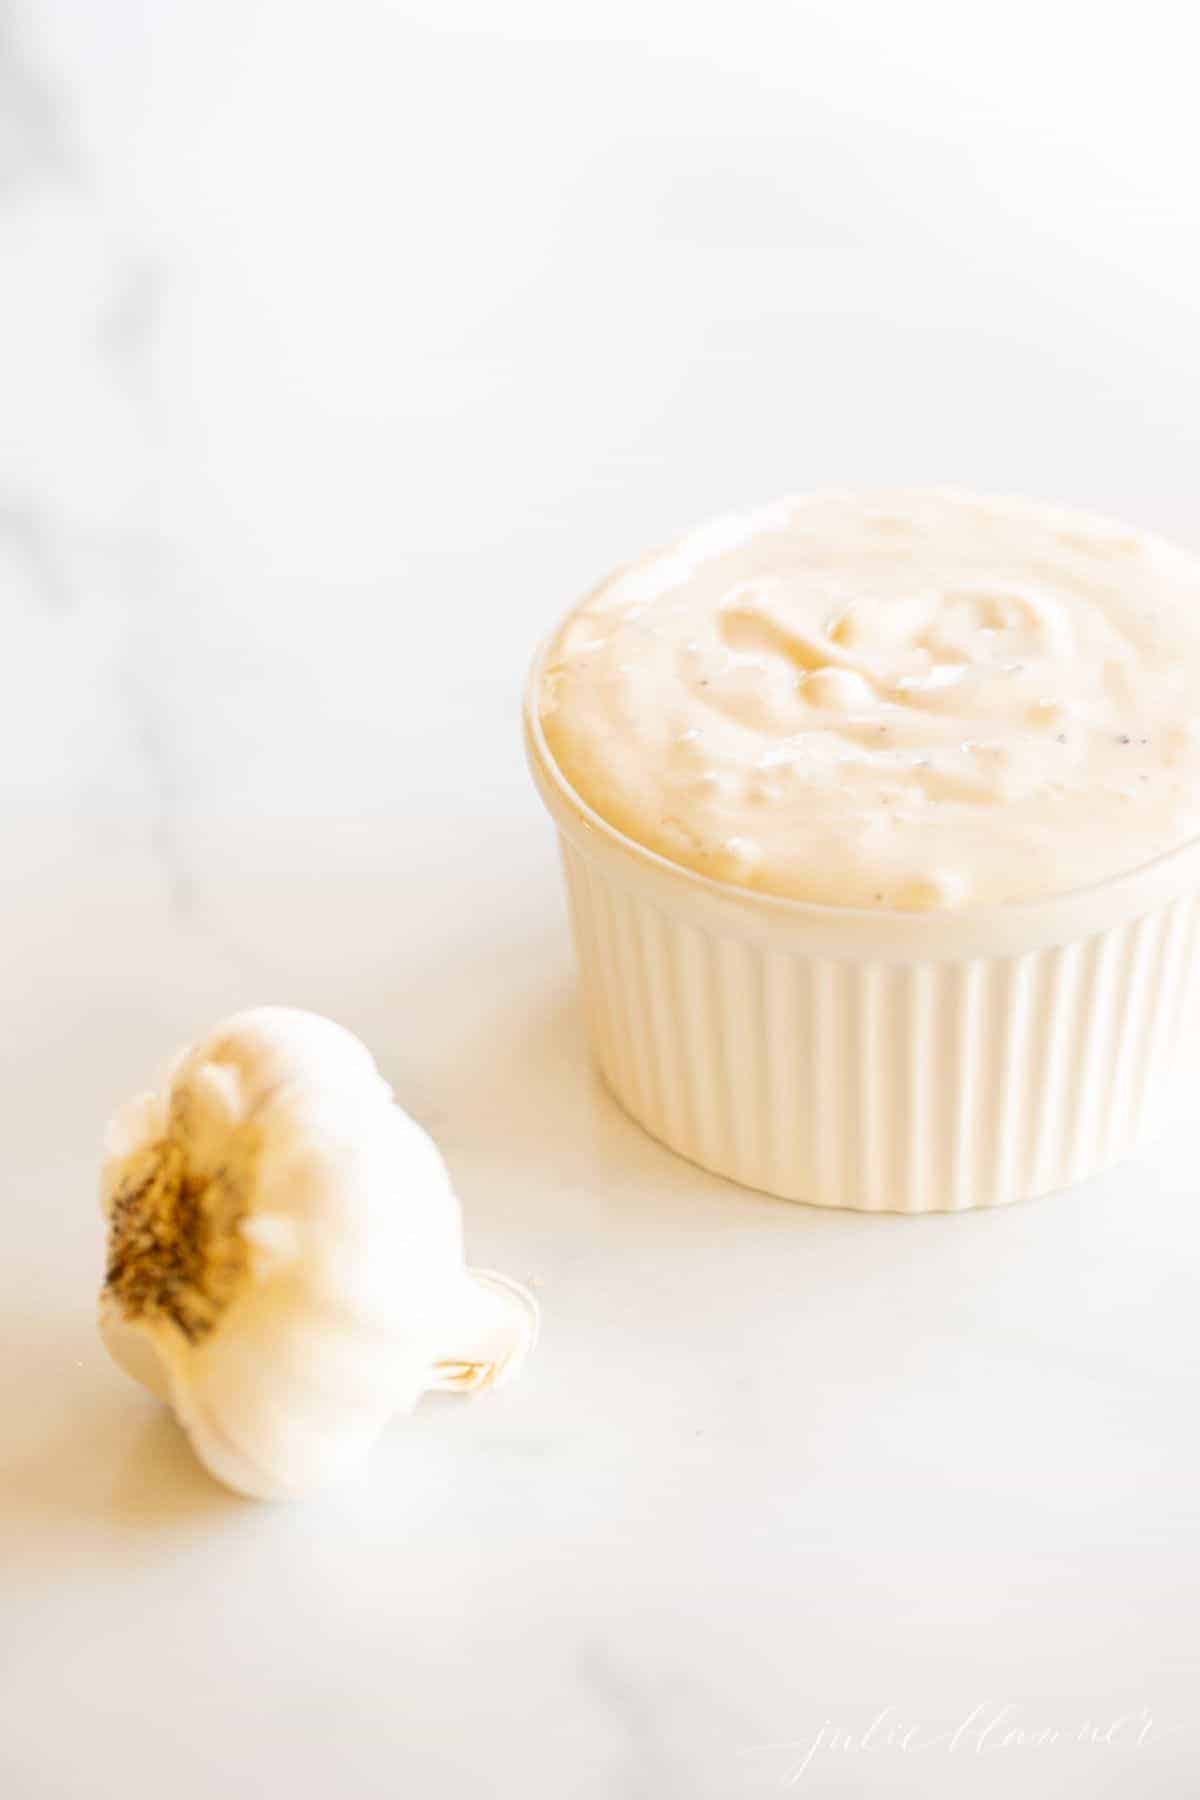 On a marble surface, a white ramekin dish full of fresh garlic aioli, with a head of garlic to the side.